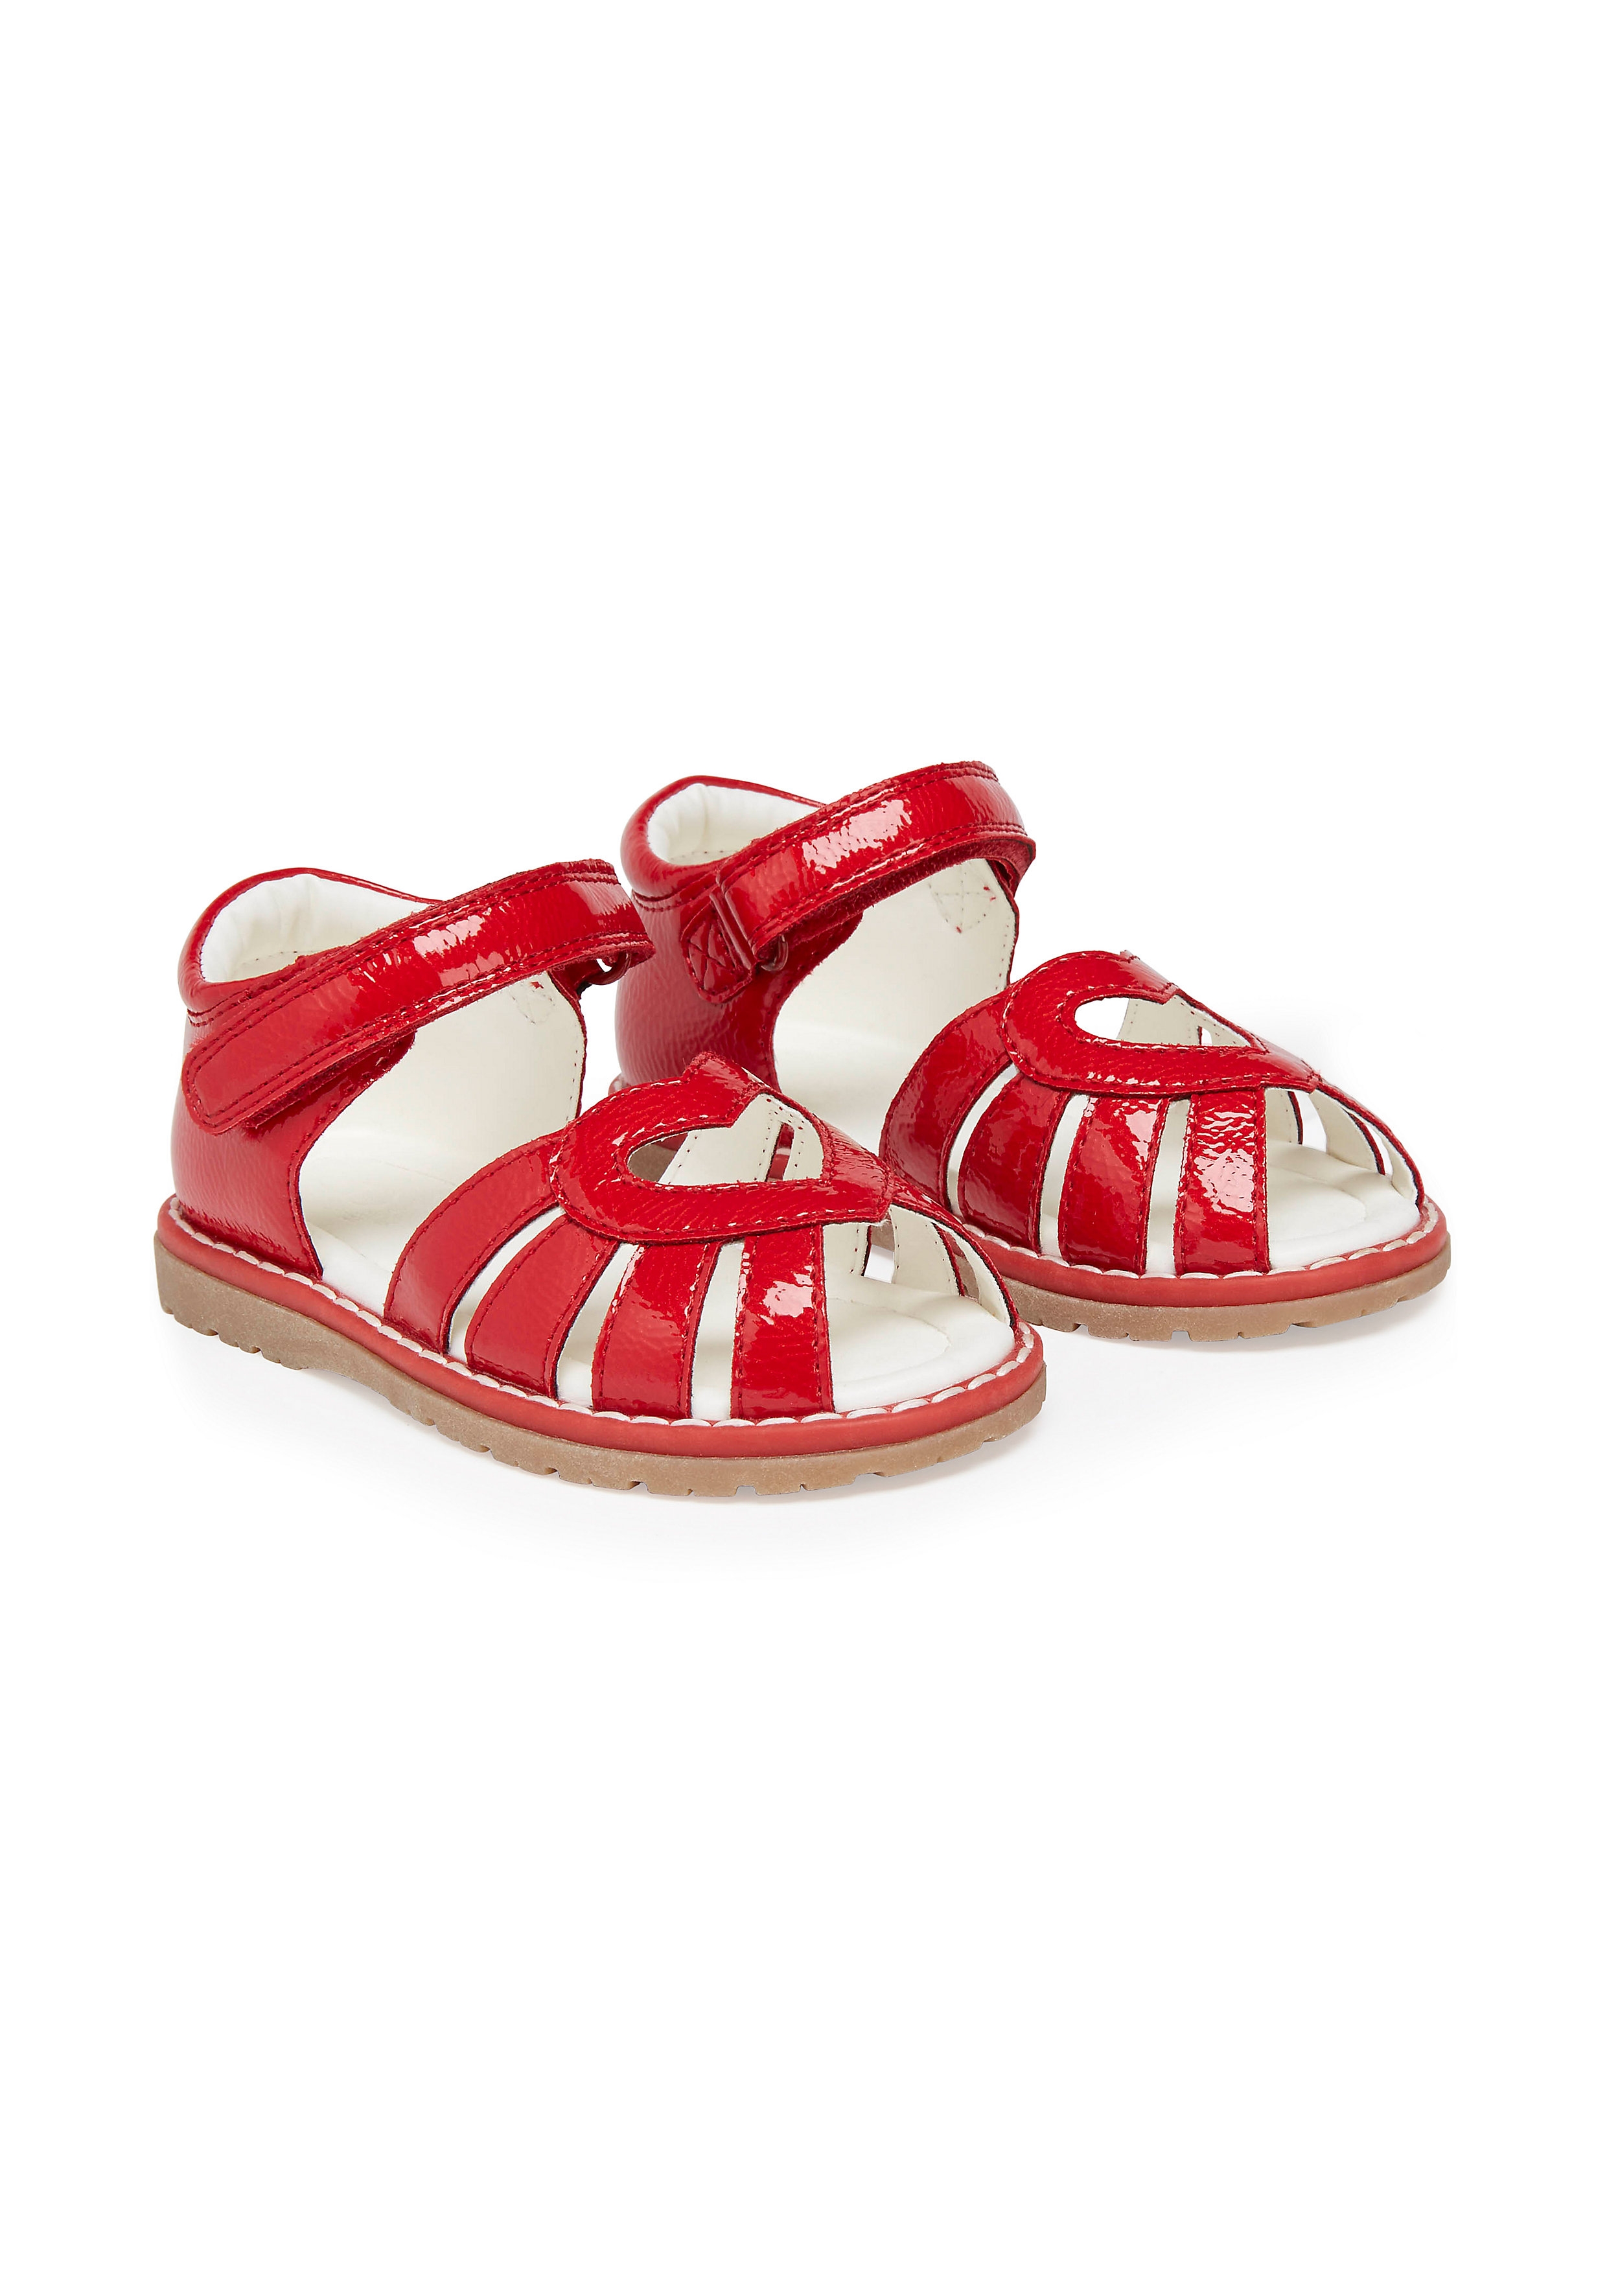 Mothercare | Girls Sandals Heart Design - Red